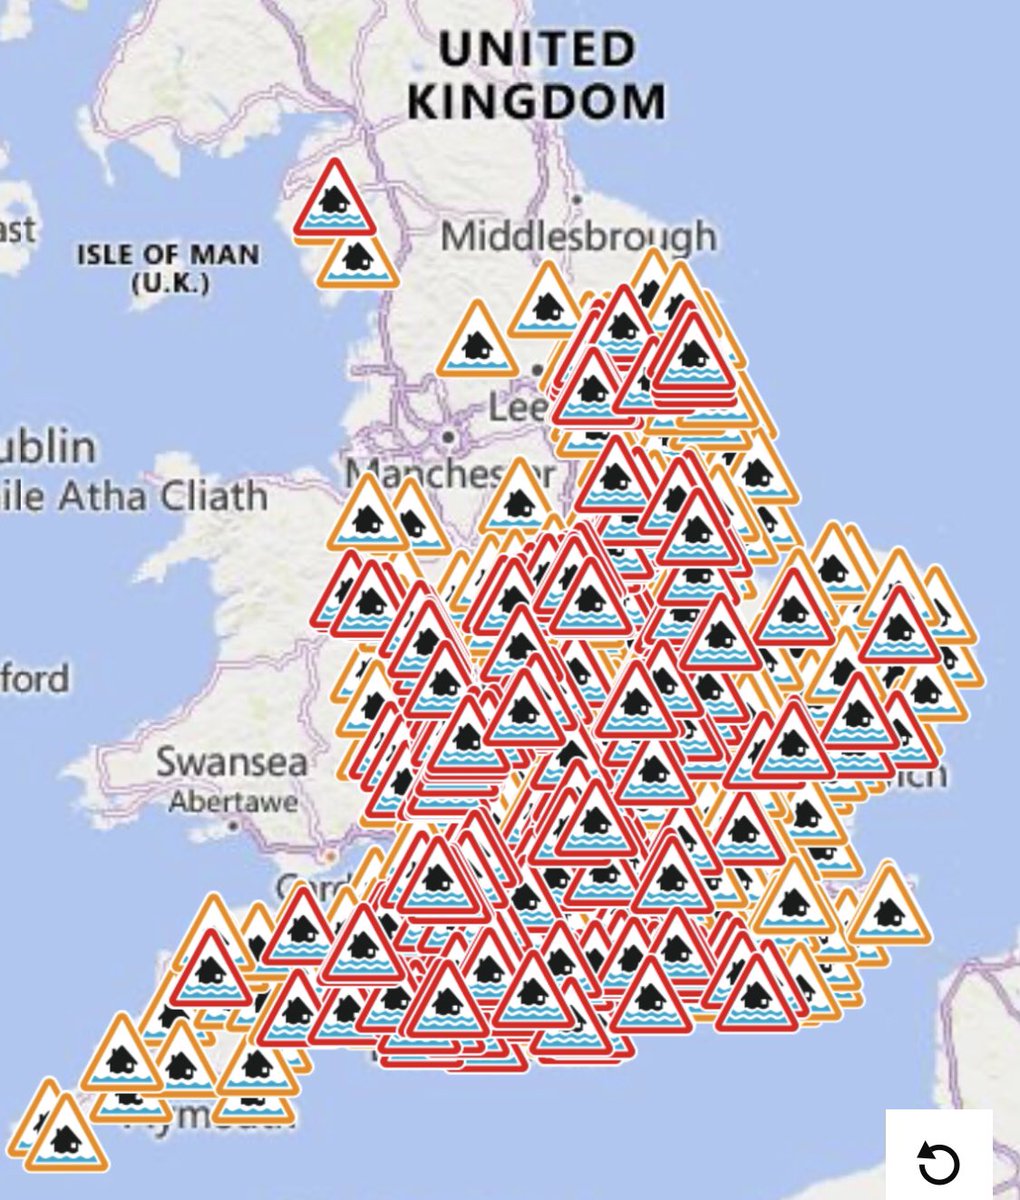 (1) currently 307 #floodwarnings and 334 flood alerts across the UK. River levels are still rising in many places. Check your flood risk check-for-flooding.service.gov.uk/alerts-and-war…. At risk? See thread below 👇